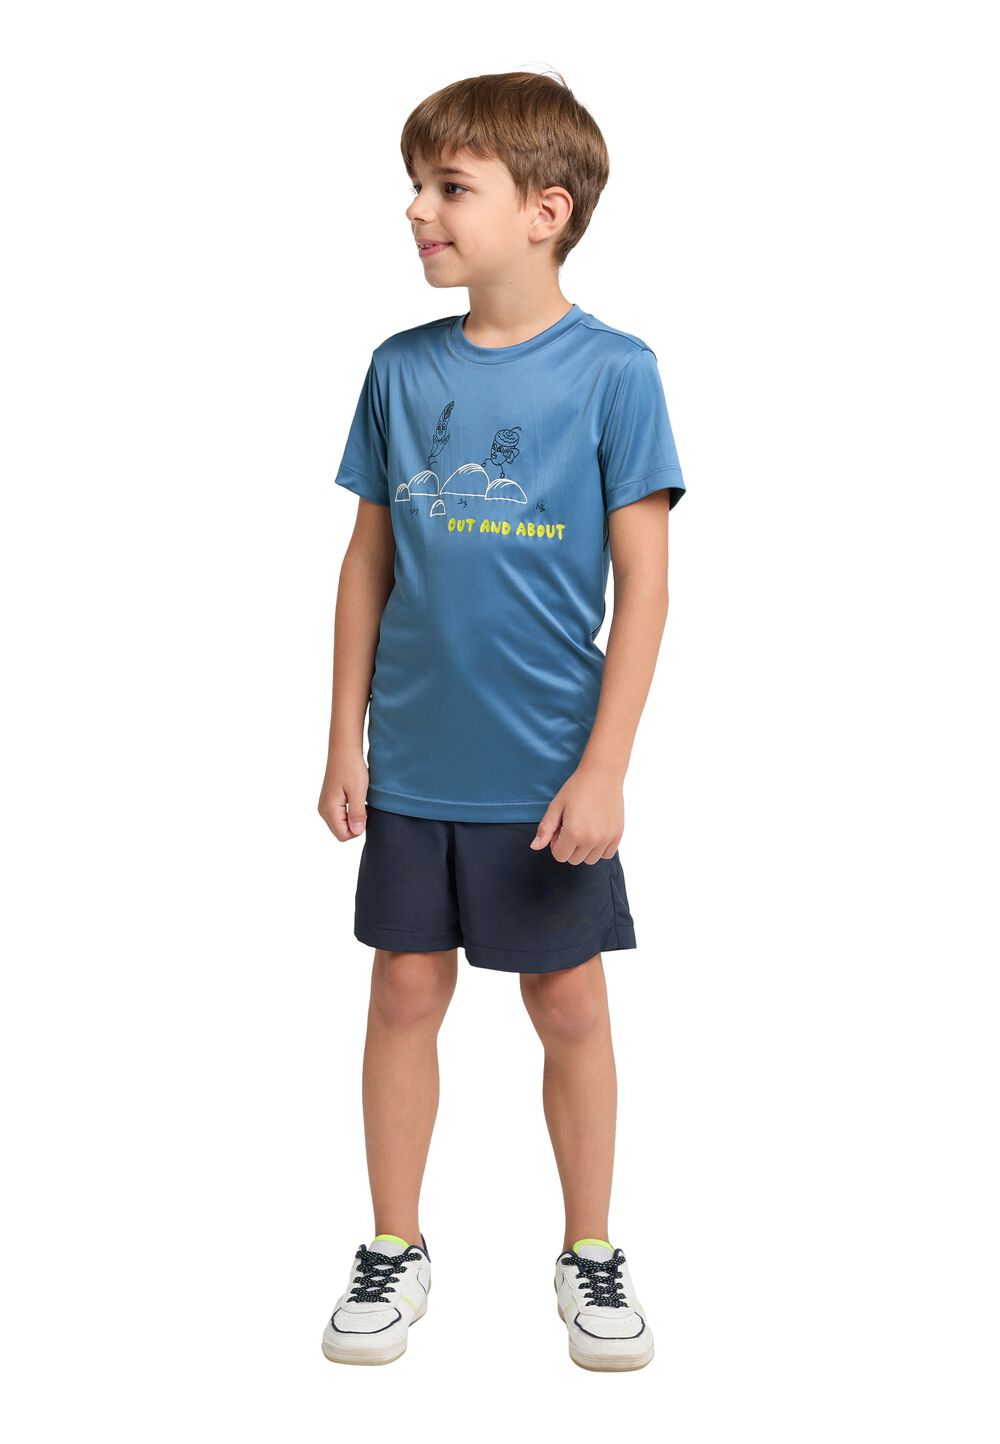 Jack Wolfskin OUT AND About T-Shirt Kids Functioneel shirt Kinderen 104 ele tal blue ele tal blue